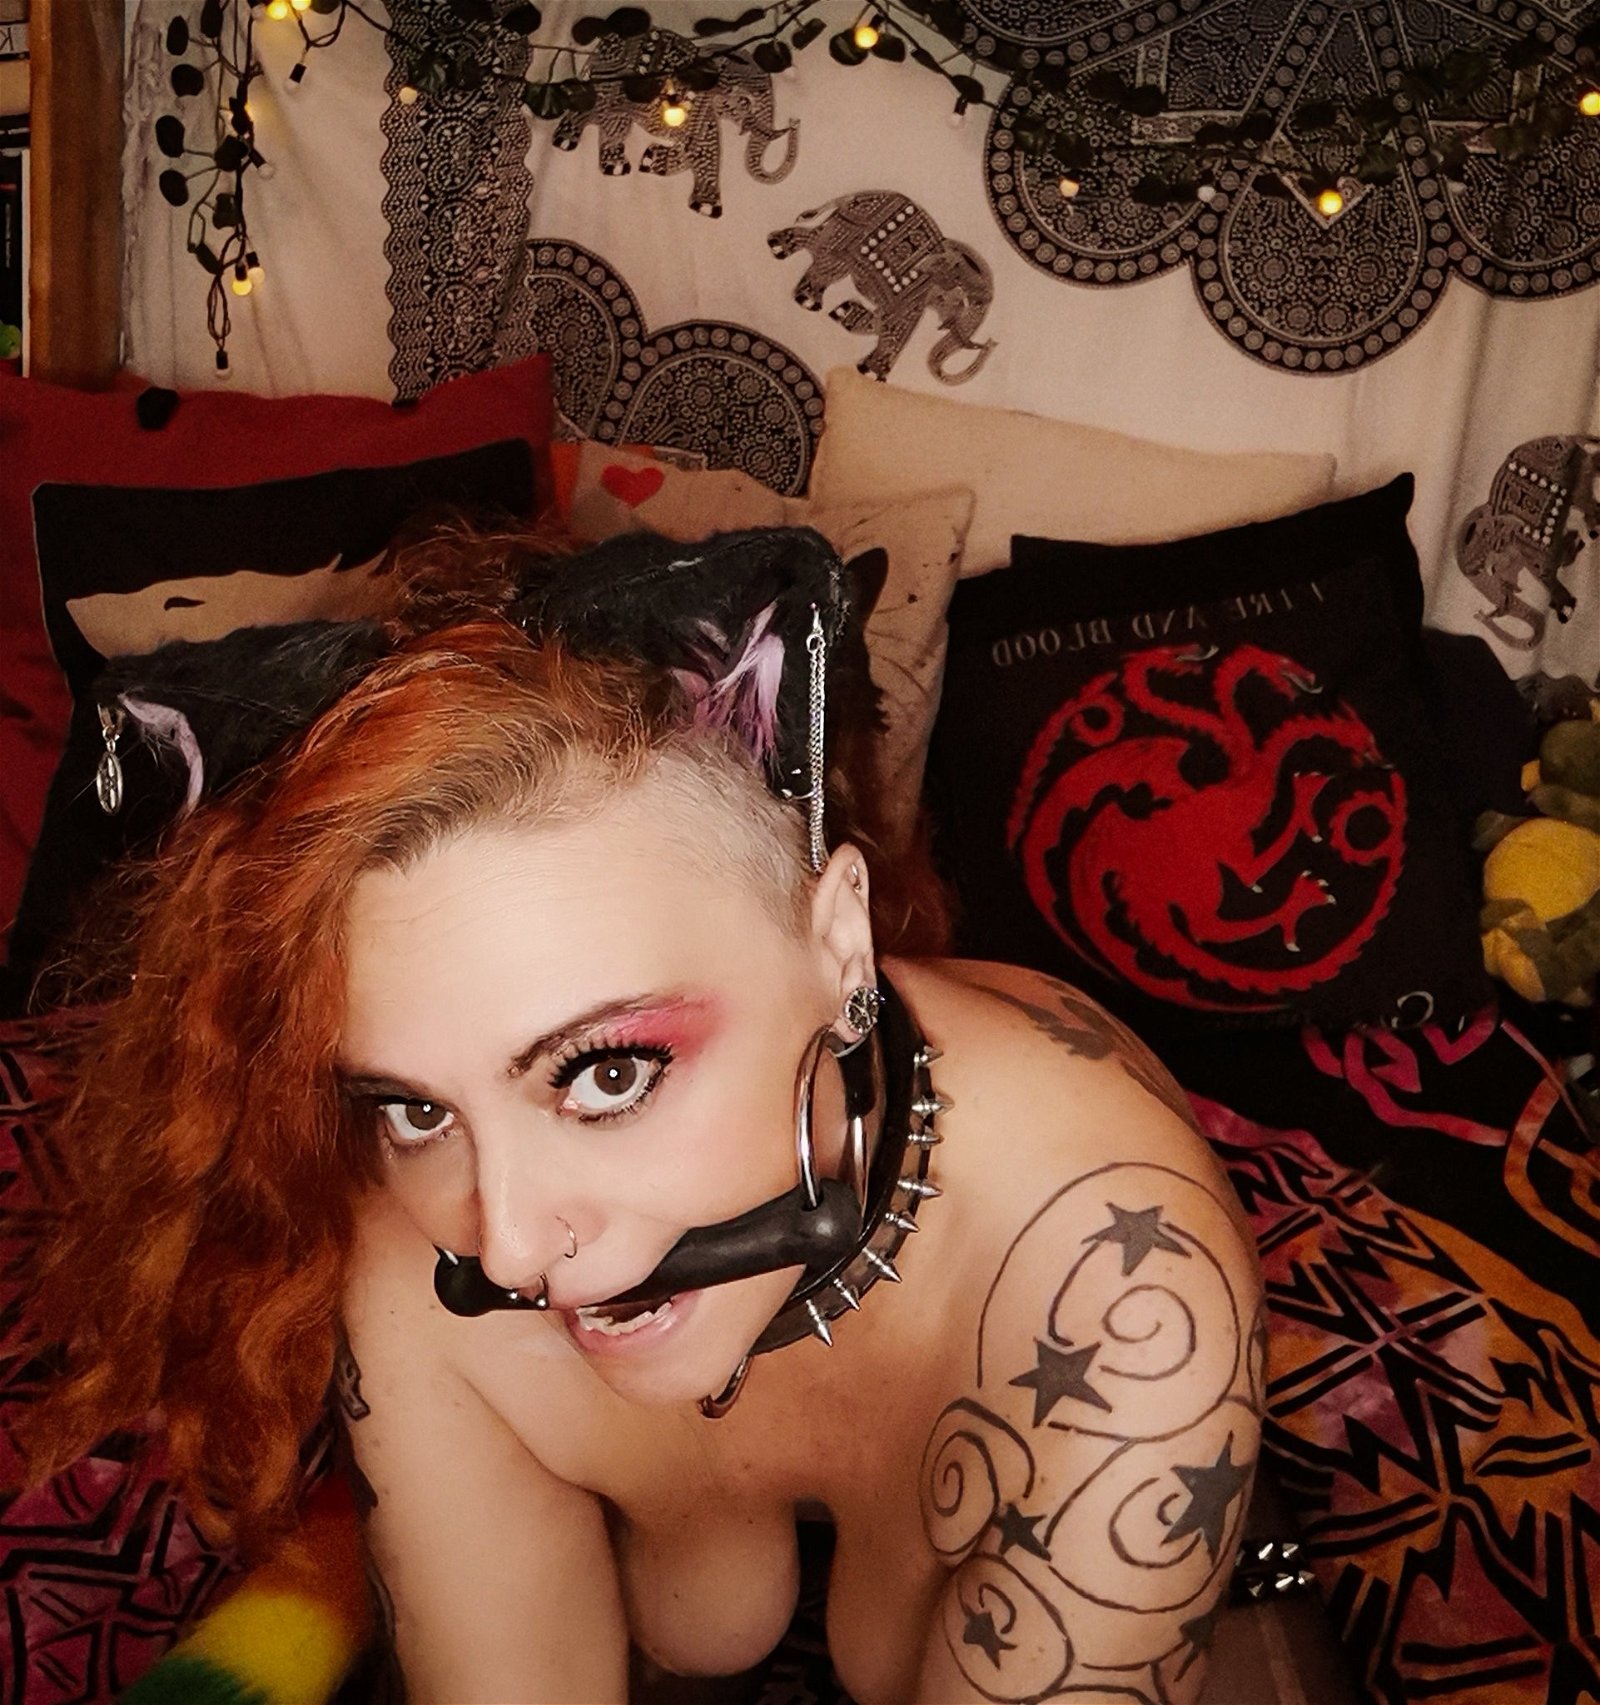 Photo by Nekotied with the username @nekotied, who is a star user,  September 26, 2020 at 3:45 AM. The post is about the topic Bondage and the text says 'Do you ever wondered what it feels playing with a wild beast? Try to tame me. Im wandering wild on my OnlyFans. You should adopt me to start the weekend like a hero 
http://onlyfans.com/nekotied'